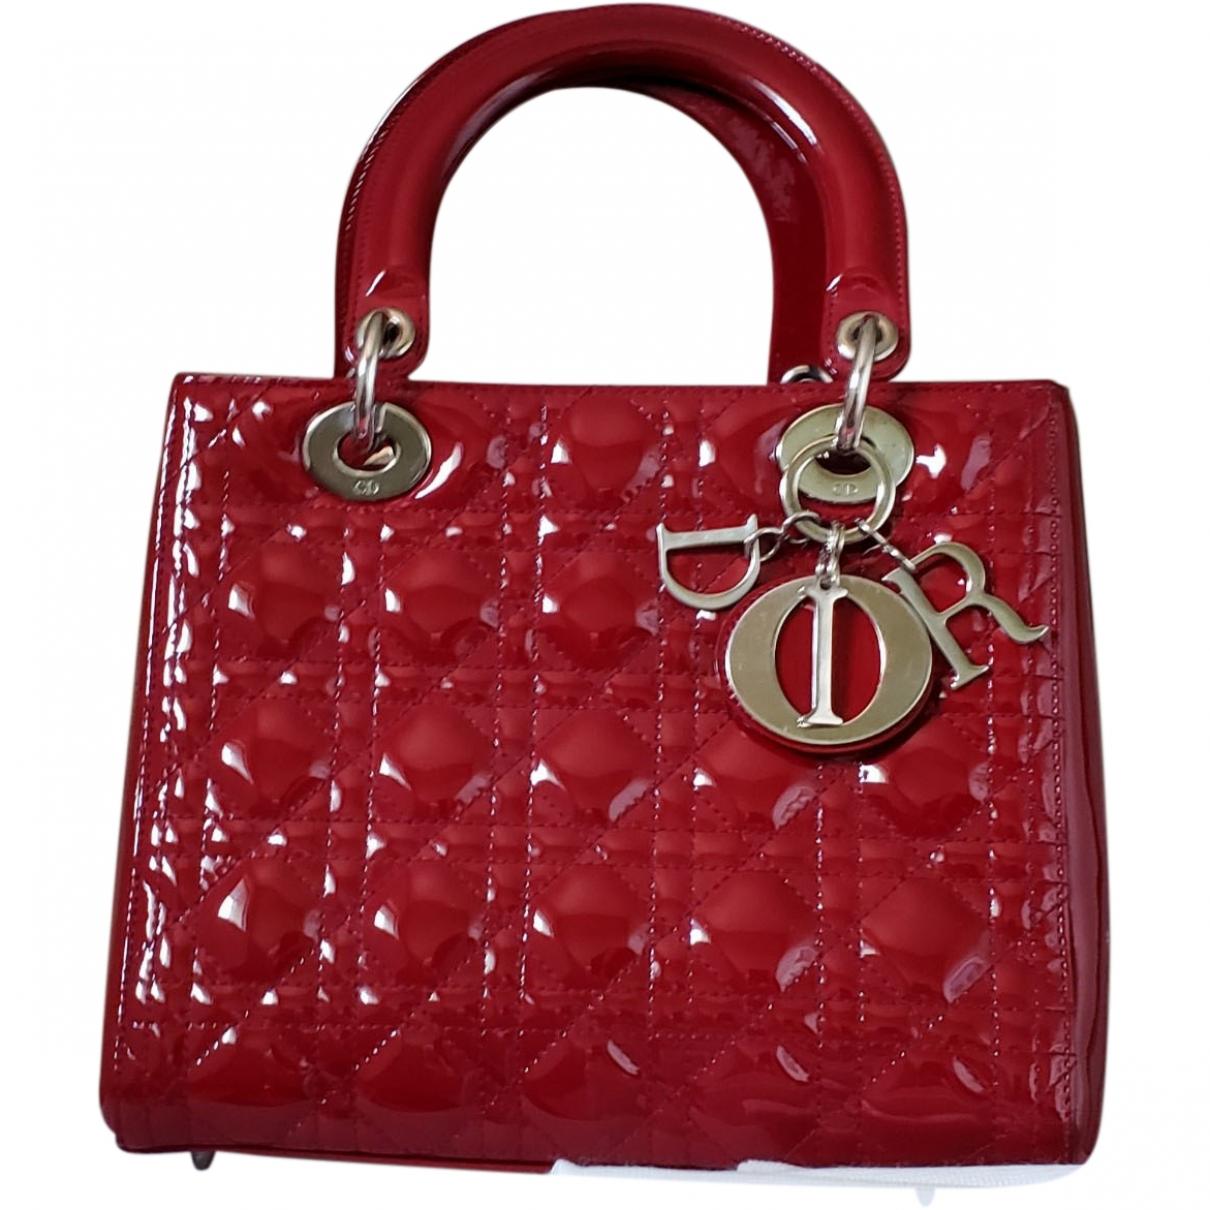 Dior Lady Red Patent Leather Handbag in Red - Lyst